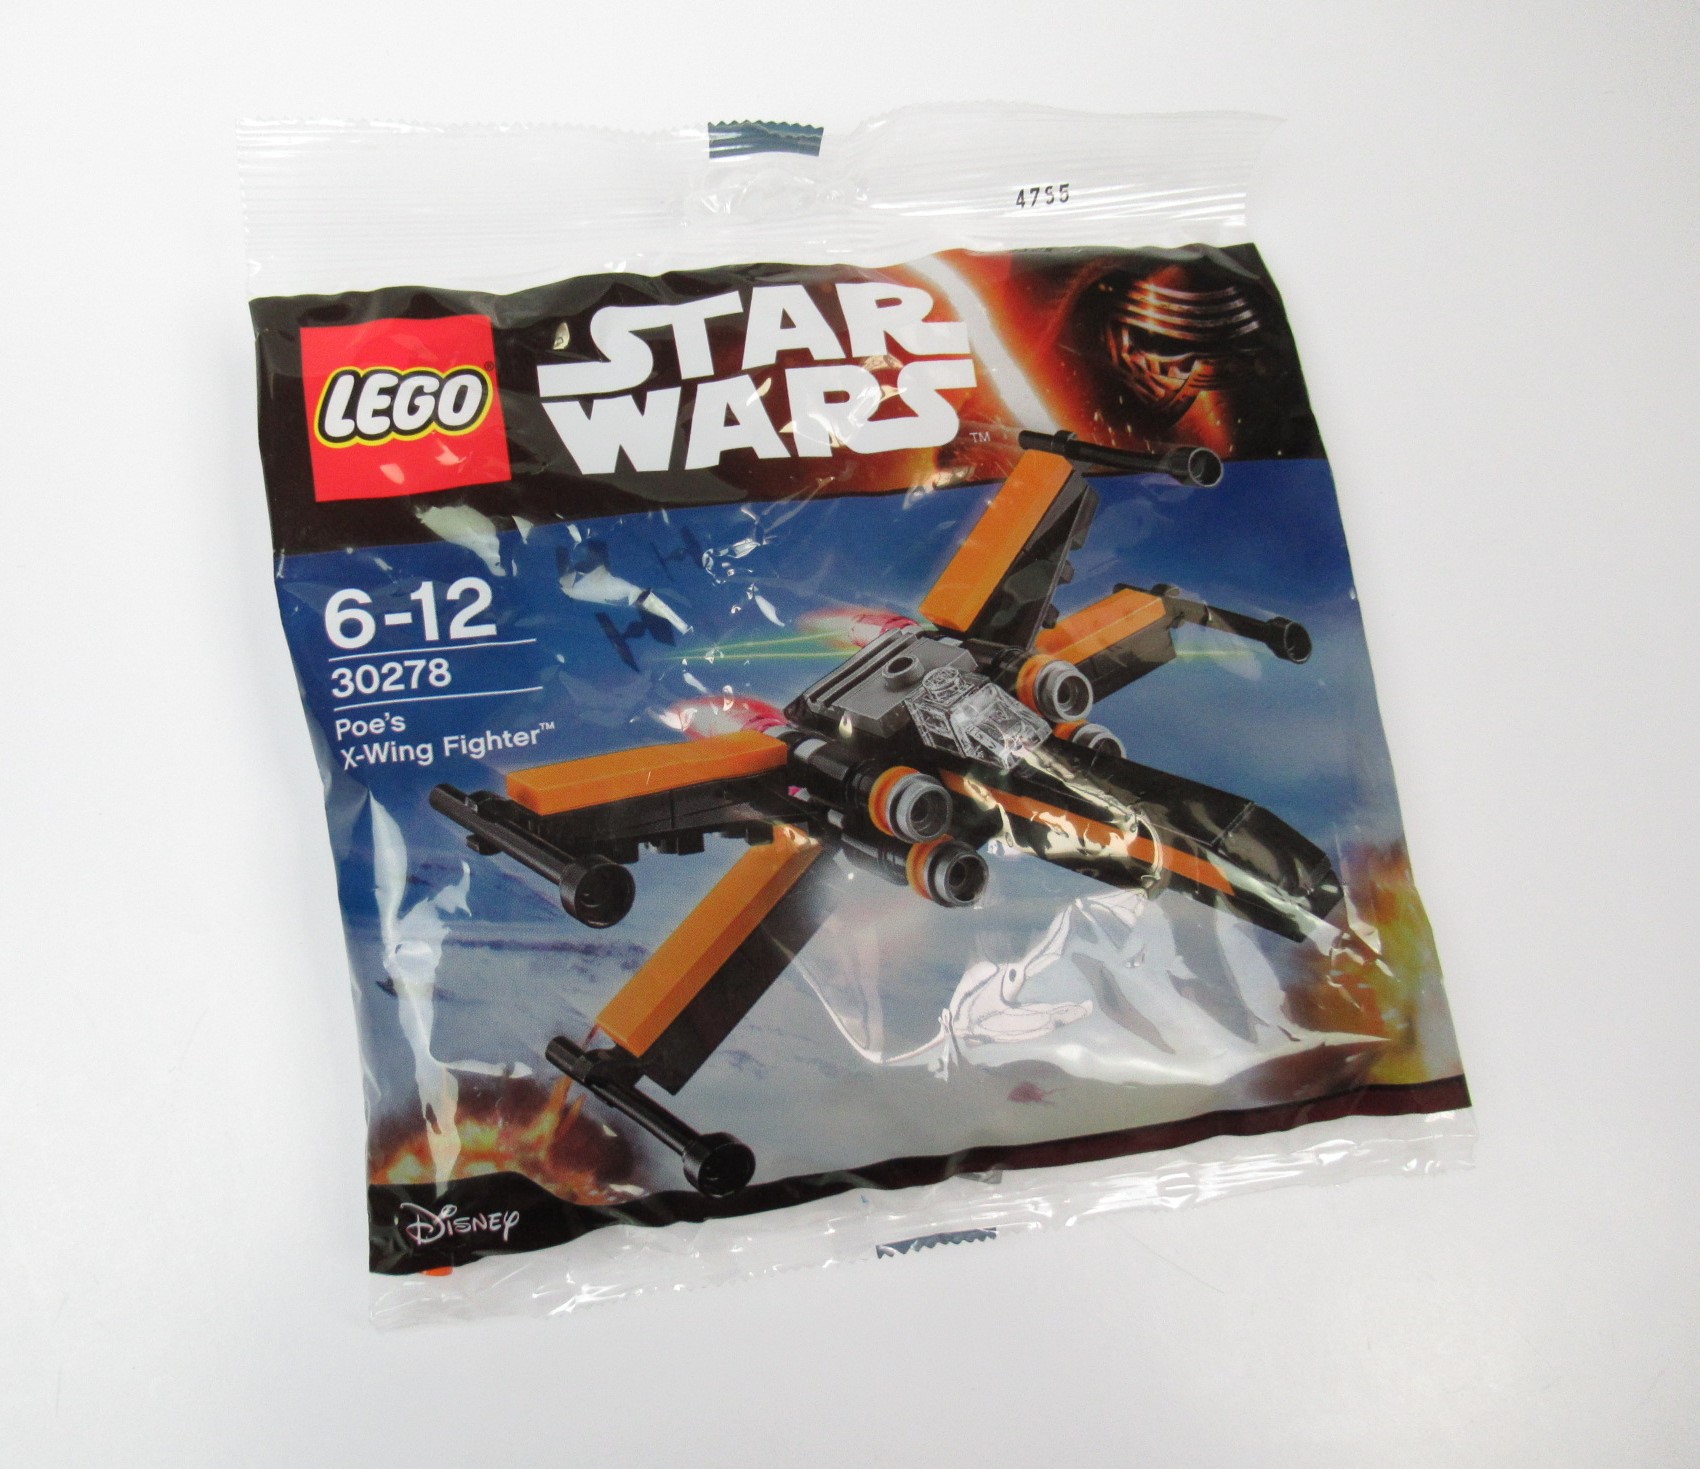 Immagine relativa a X-Wing Starfighter 30278 Polybag